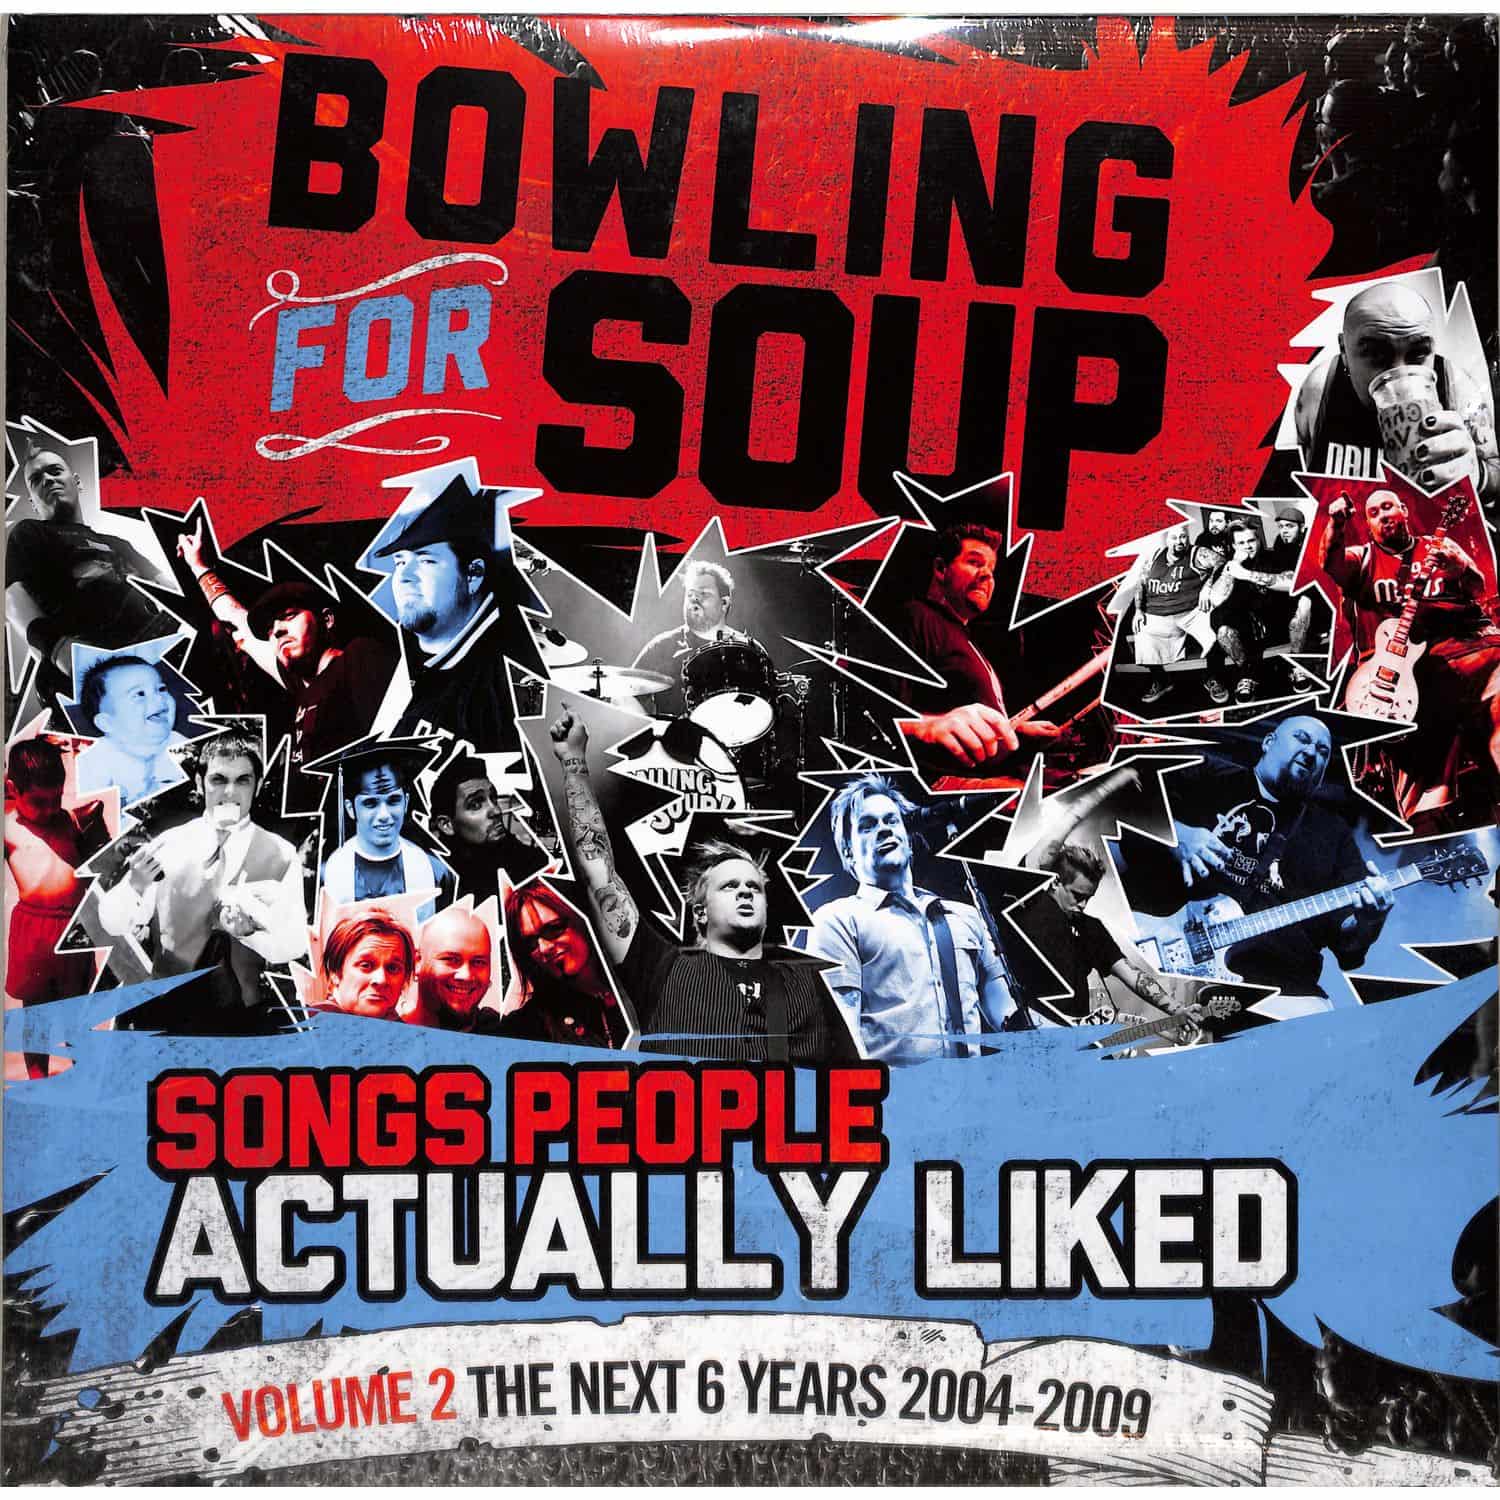 Bowling for Soup - SONGS PEOPLE ACTUALLY LIKED - VOLUME 2 - THE NEXT 